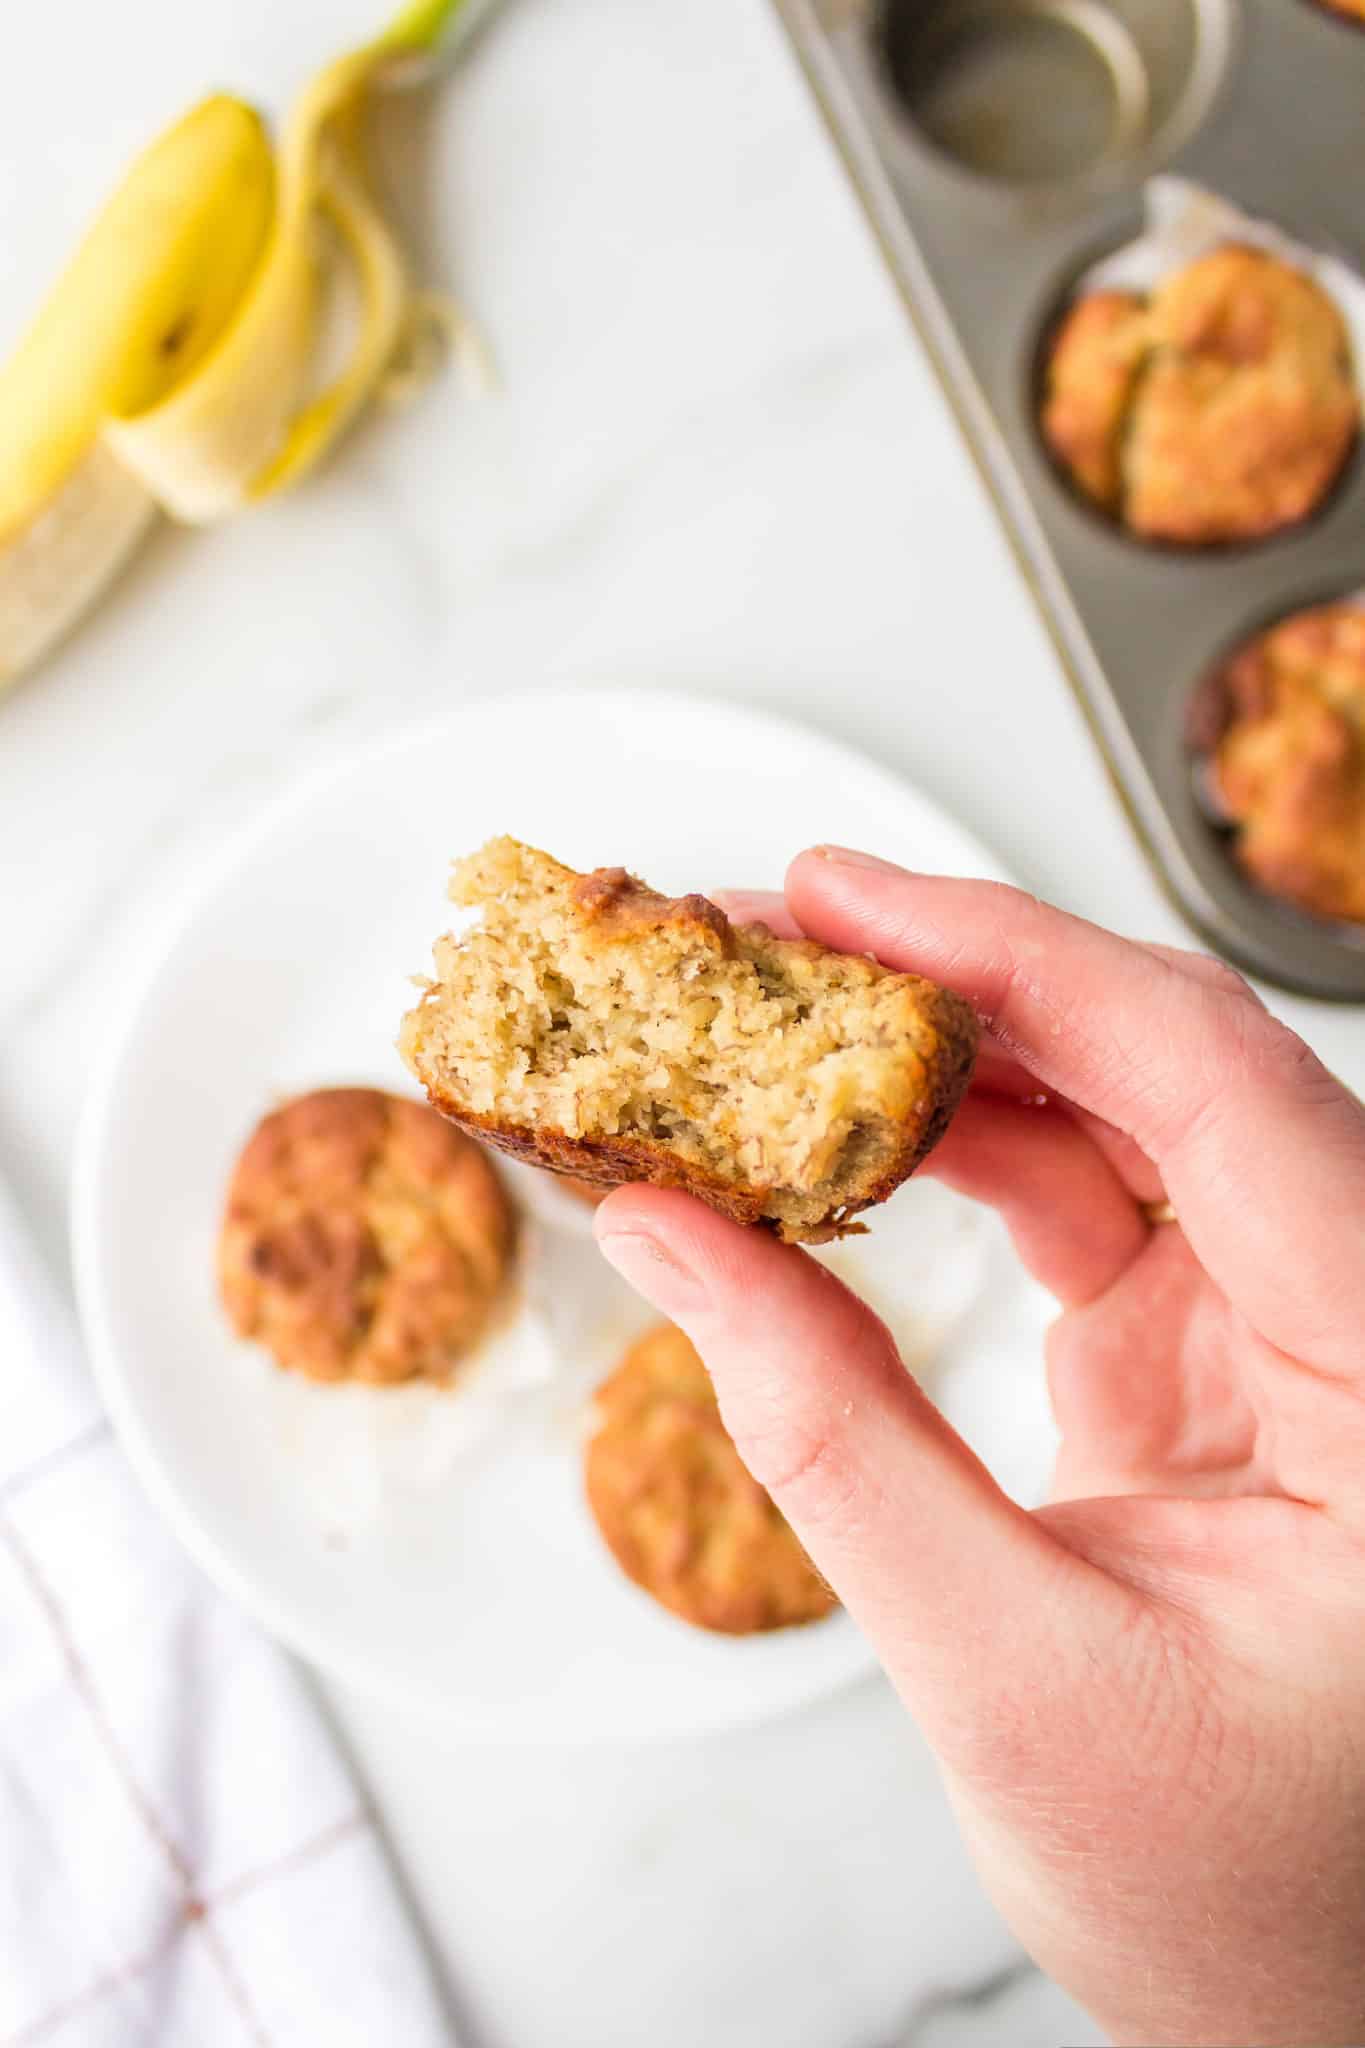 picture of a hand holding a banana almond flour muffin with a bite taken out of it.